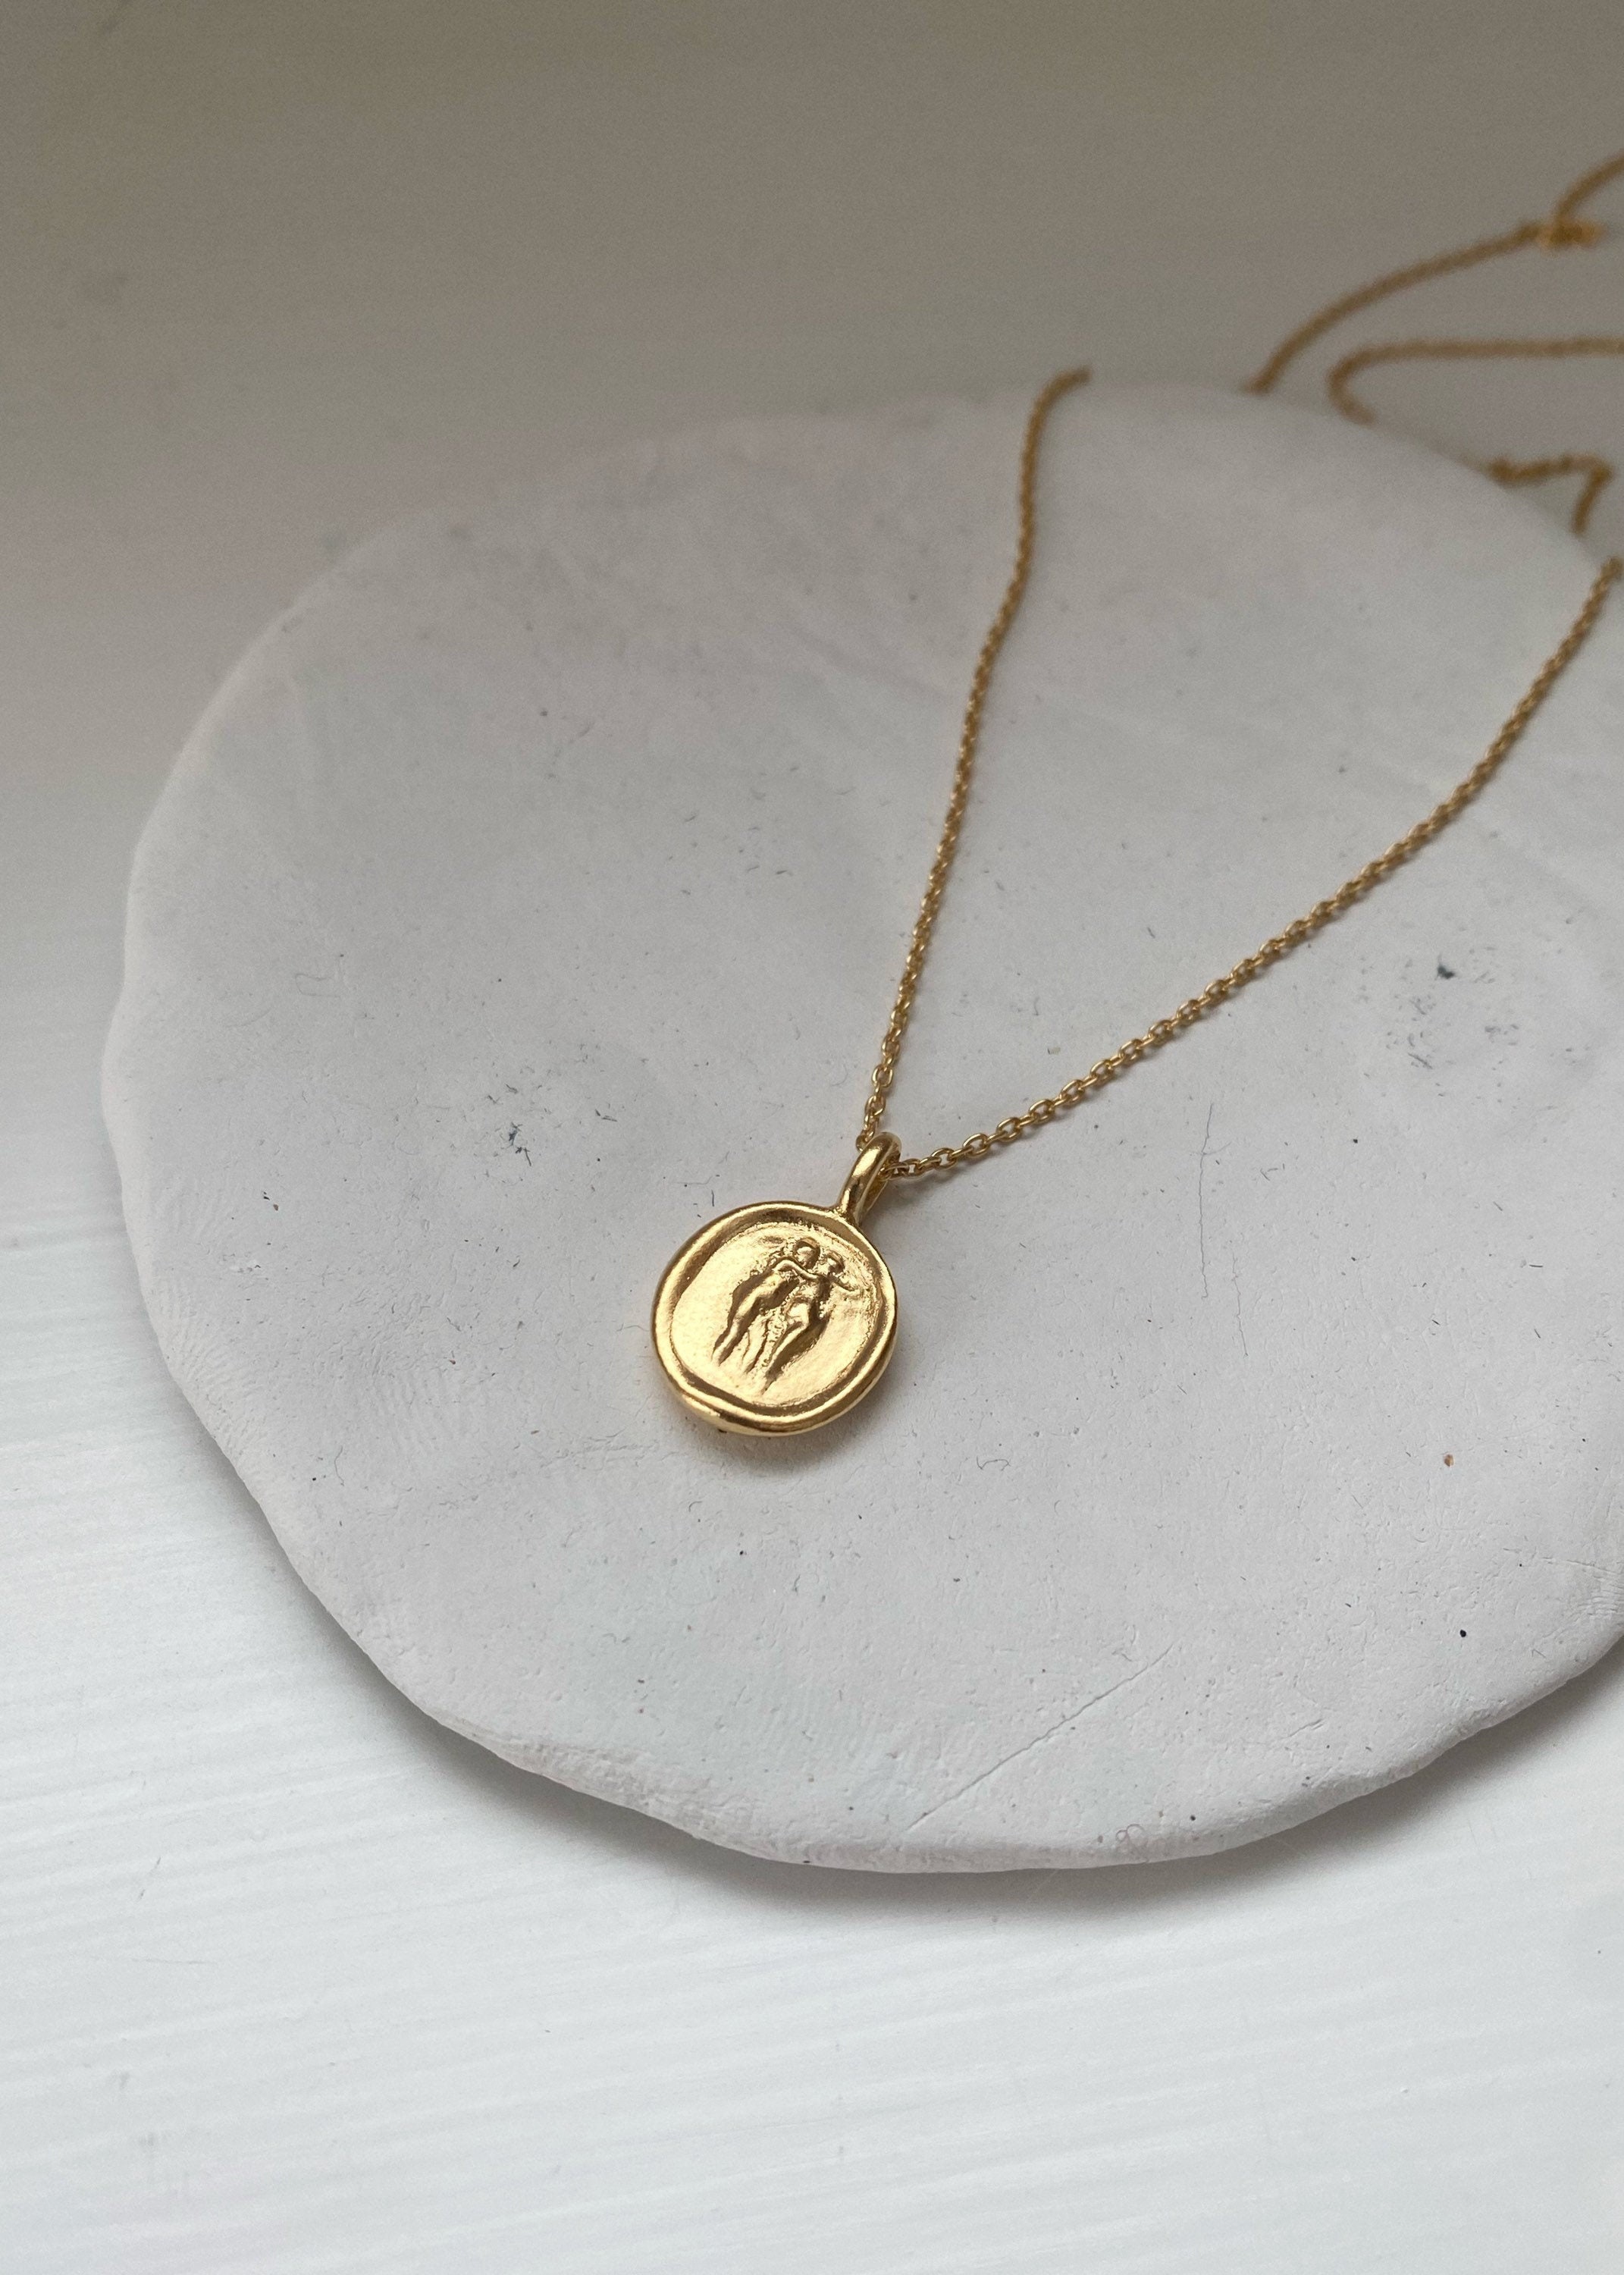  Euro Coin Vintage Necklace by D'Mundo Accesorios. 1 Euro from  Germany. Bundesadler Coin Pendant. Gold Plated Medallion Handmade Necklace.  : Productos Handmade